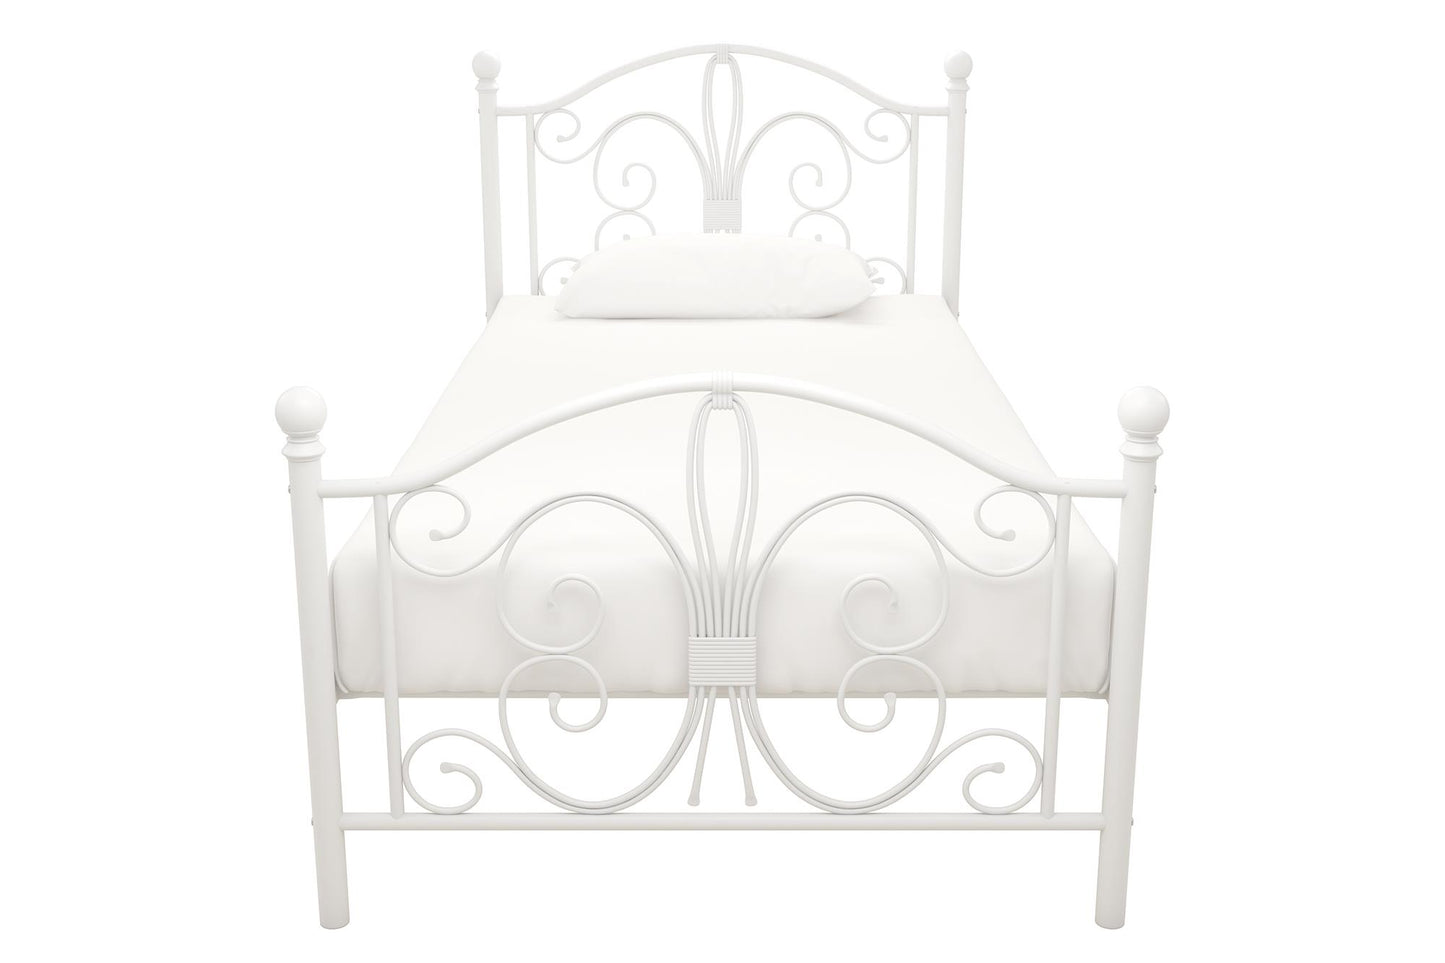 Bombay Victorian Metal Bed with Secured Metal Slats - White - Twin